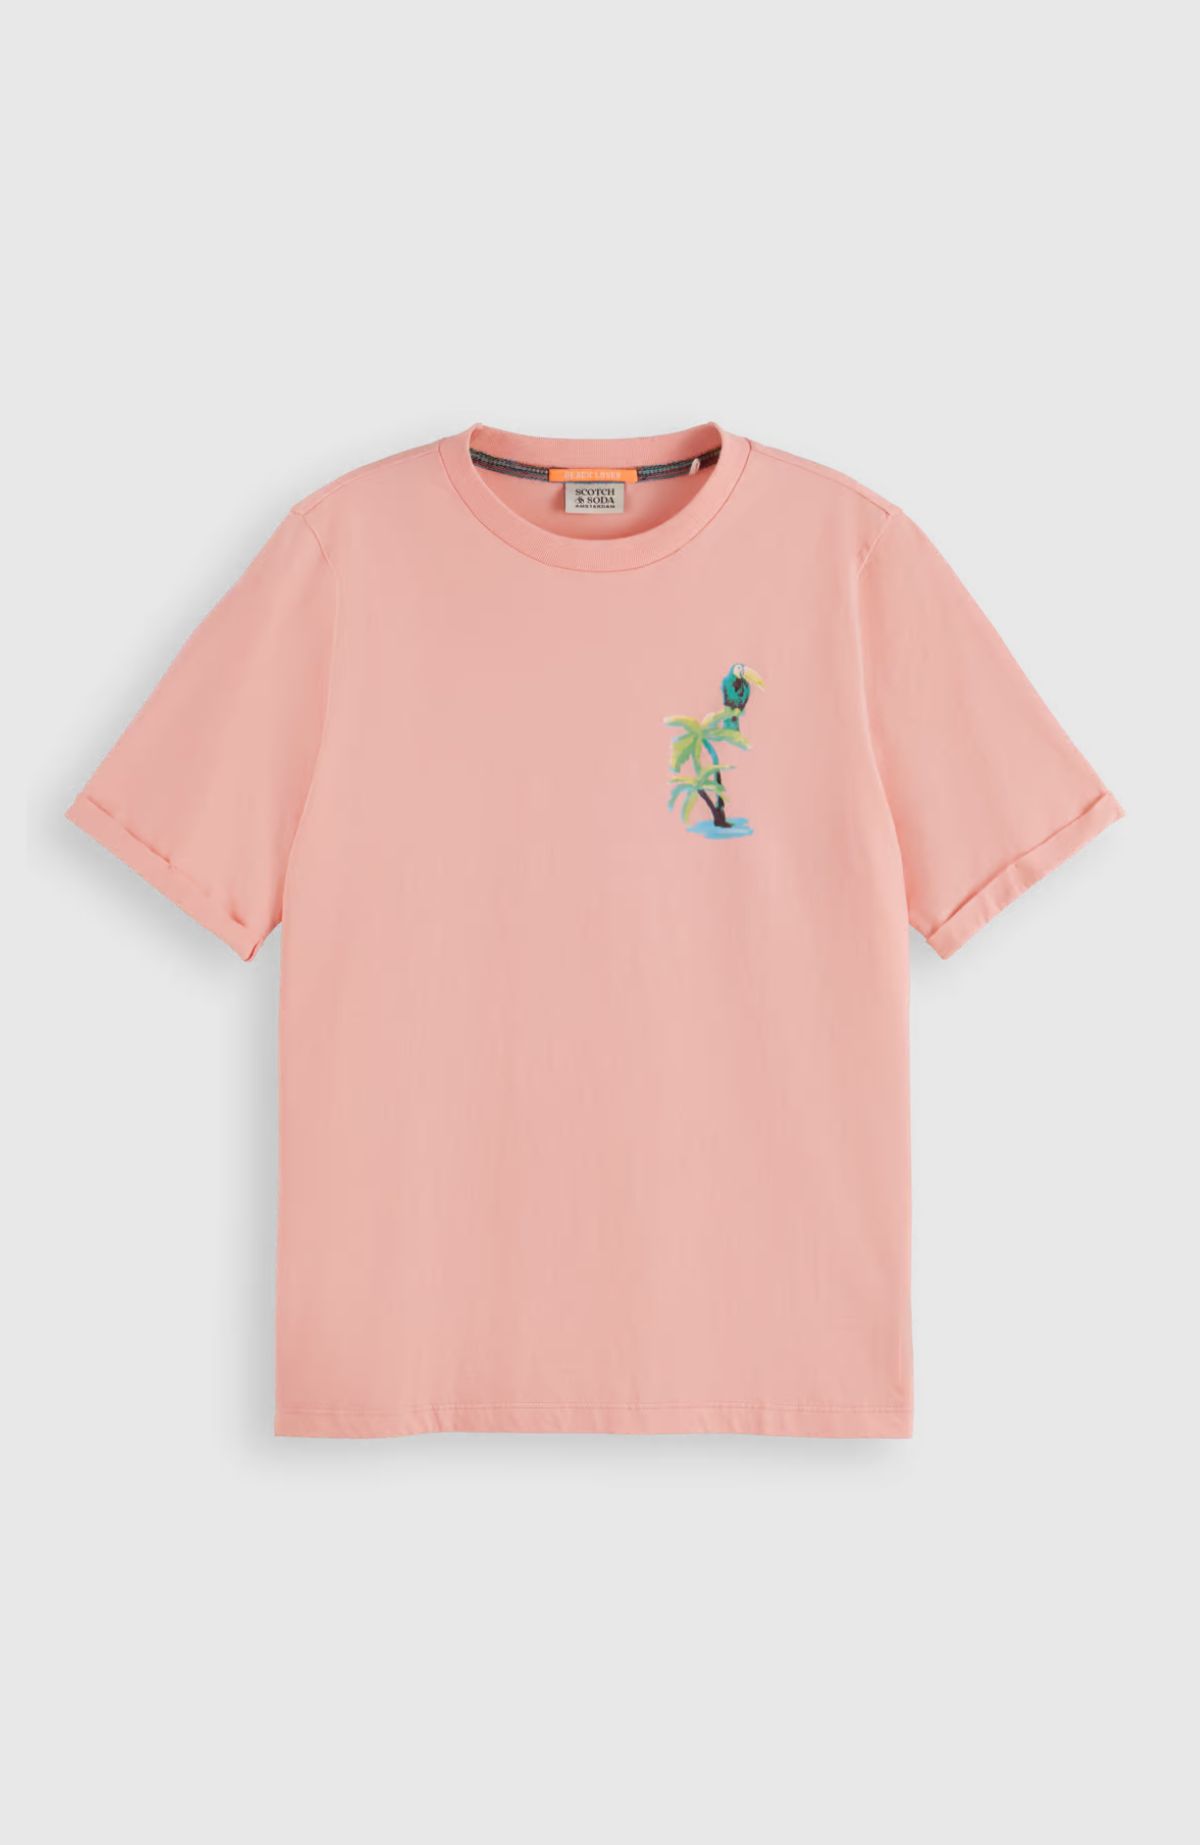 Relaxed fit graphic t-shirt